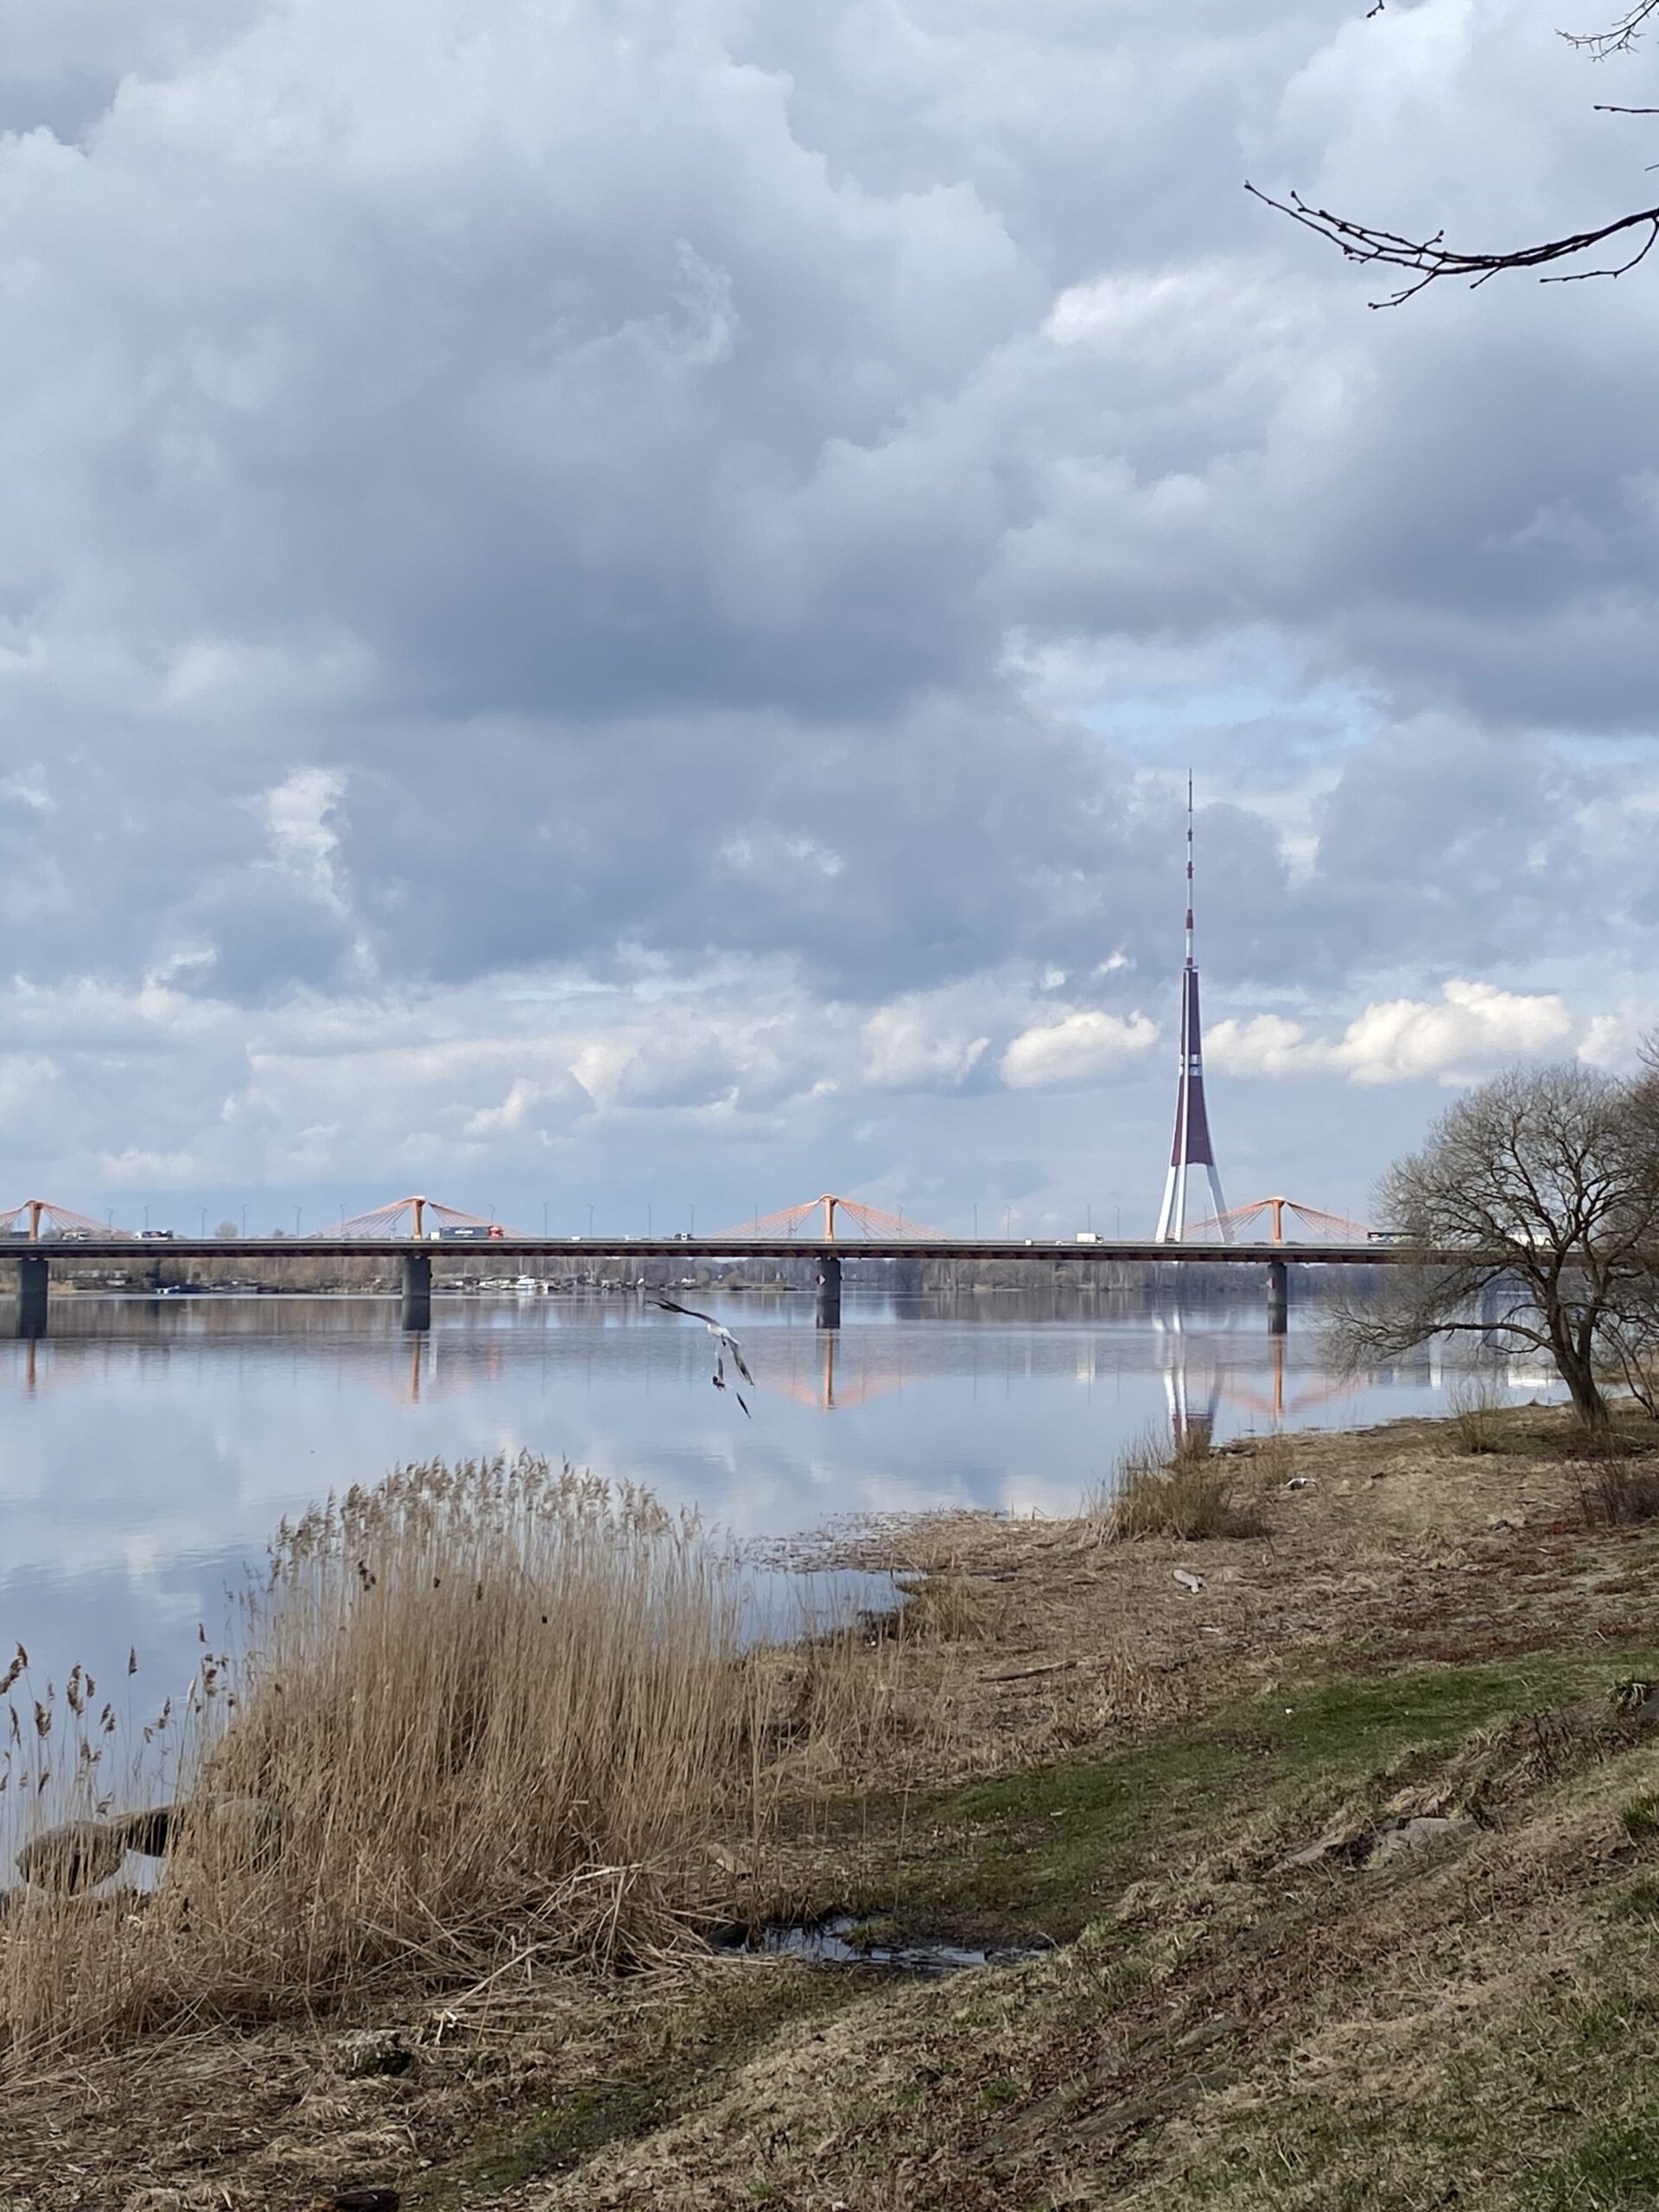 A scenic view of Riga, Latvia featuring the iconic Latvian National Television Tower and a bridge crossing the Daugava River.